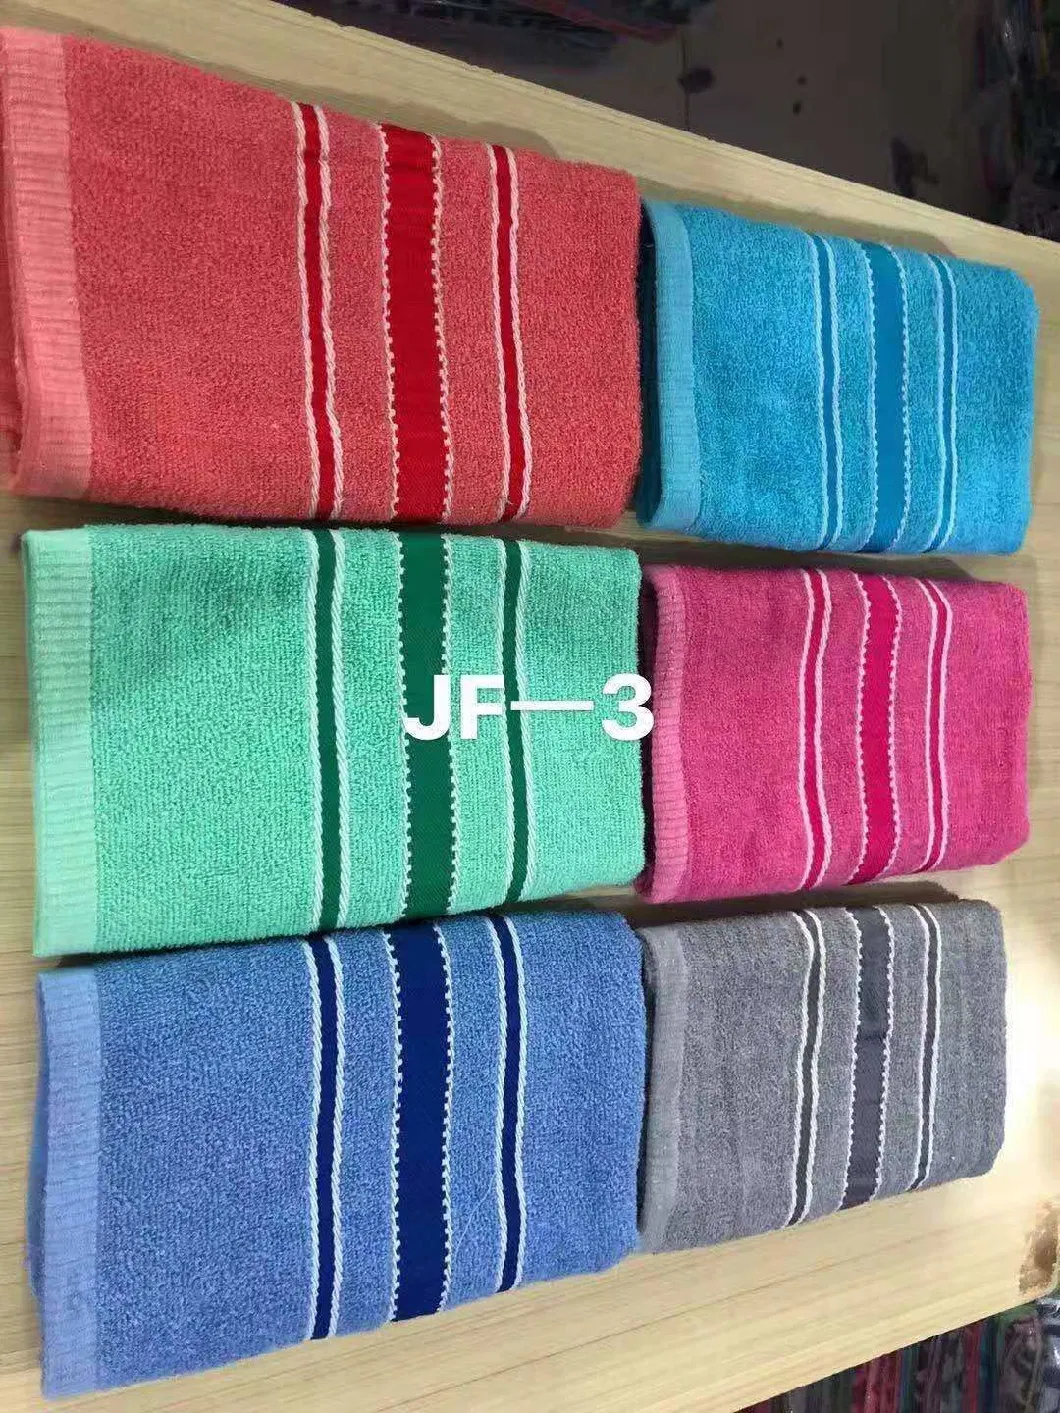 Personalised 70*140 Cm 80*160 Cm Wearable Quick Dry Soft Touch Bath Towel Cotton 100% Yarn Dyed Jacquard Towel Hand Towel Sports Hotel Towel Bath Towel